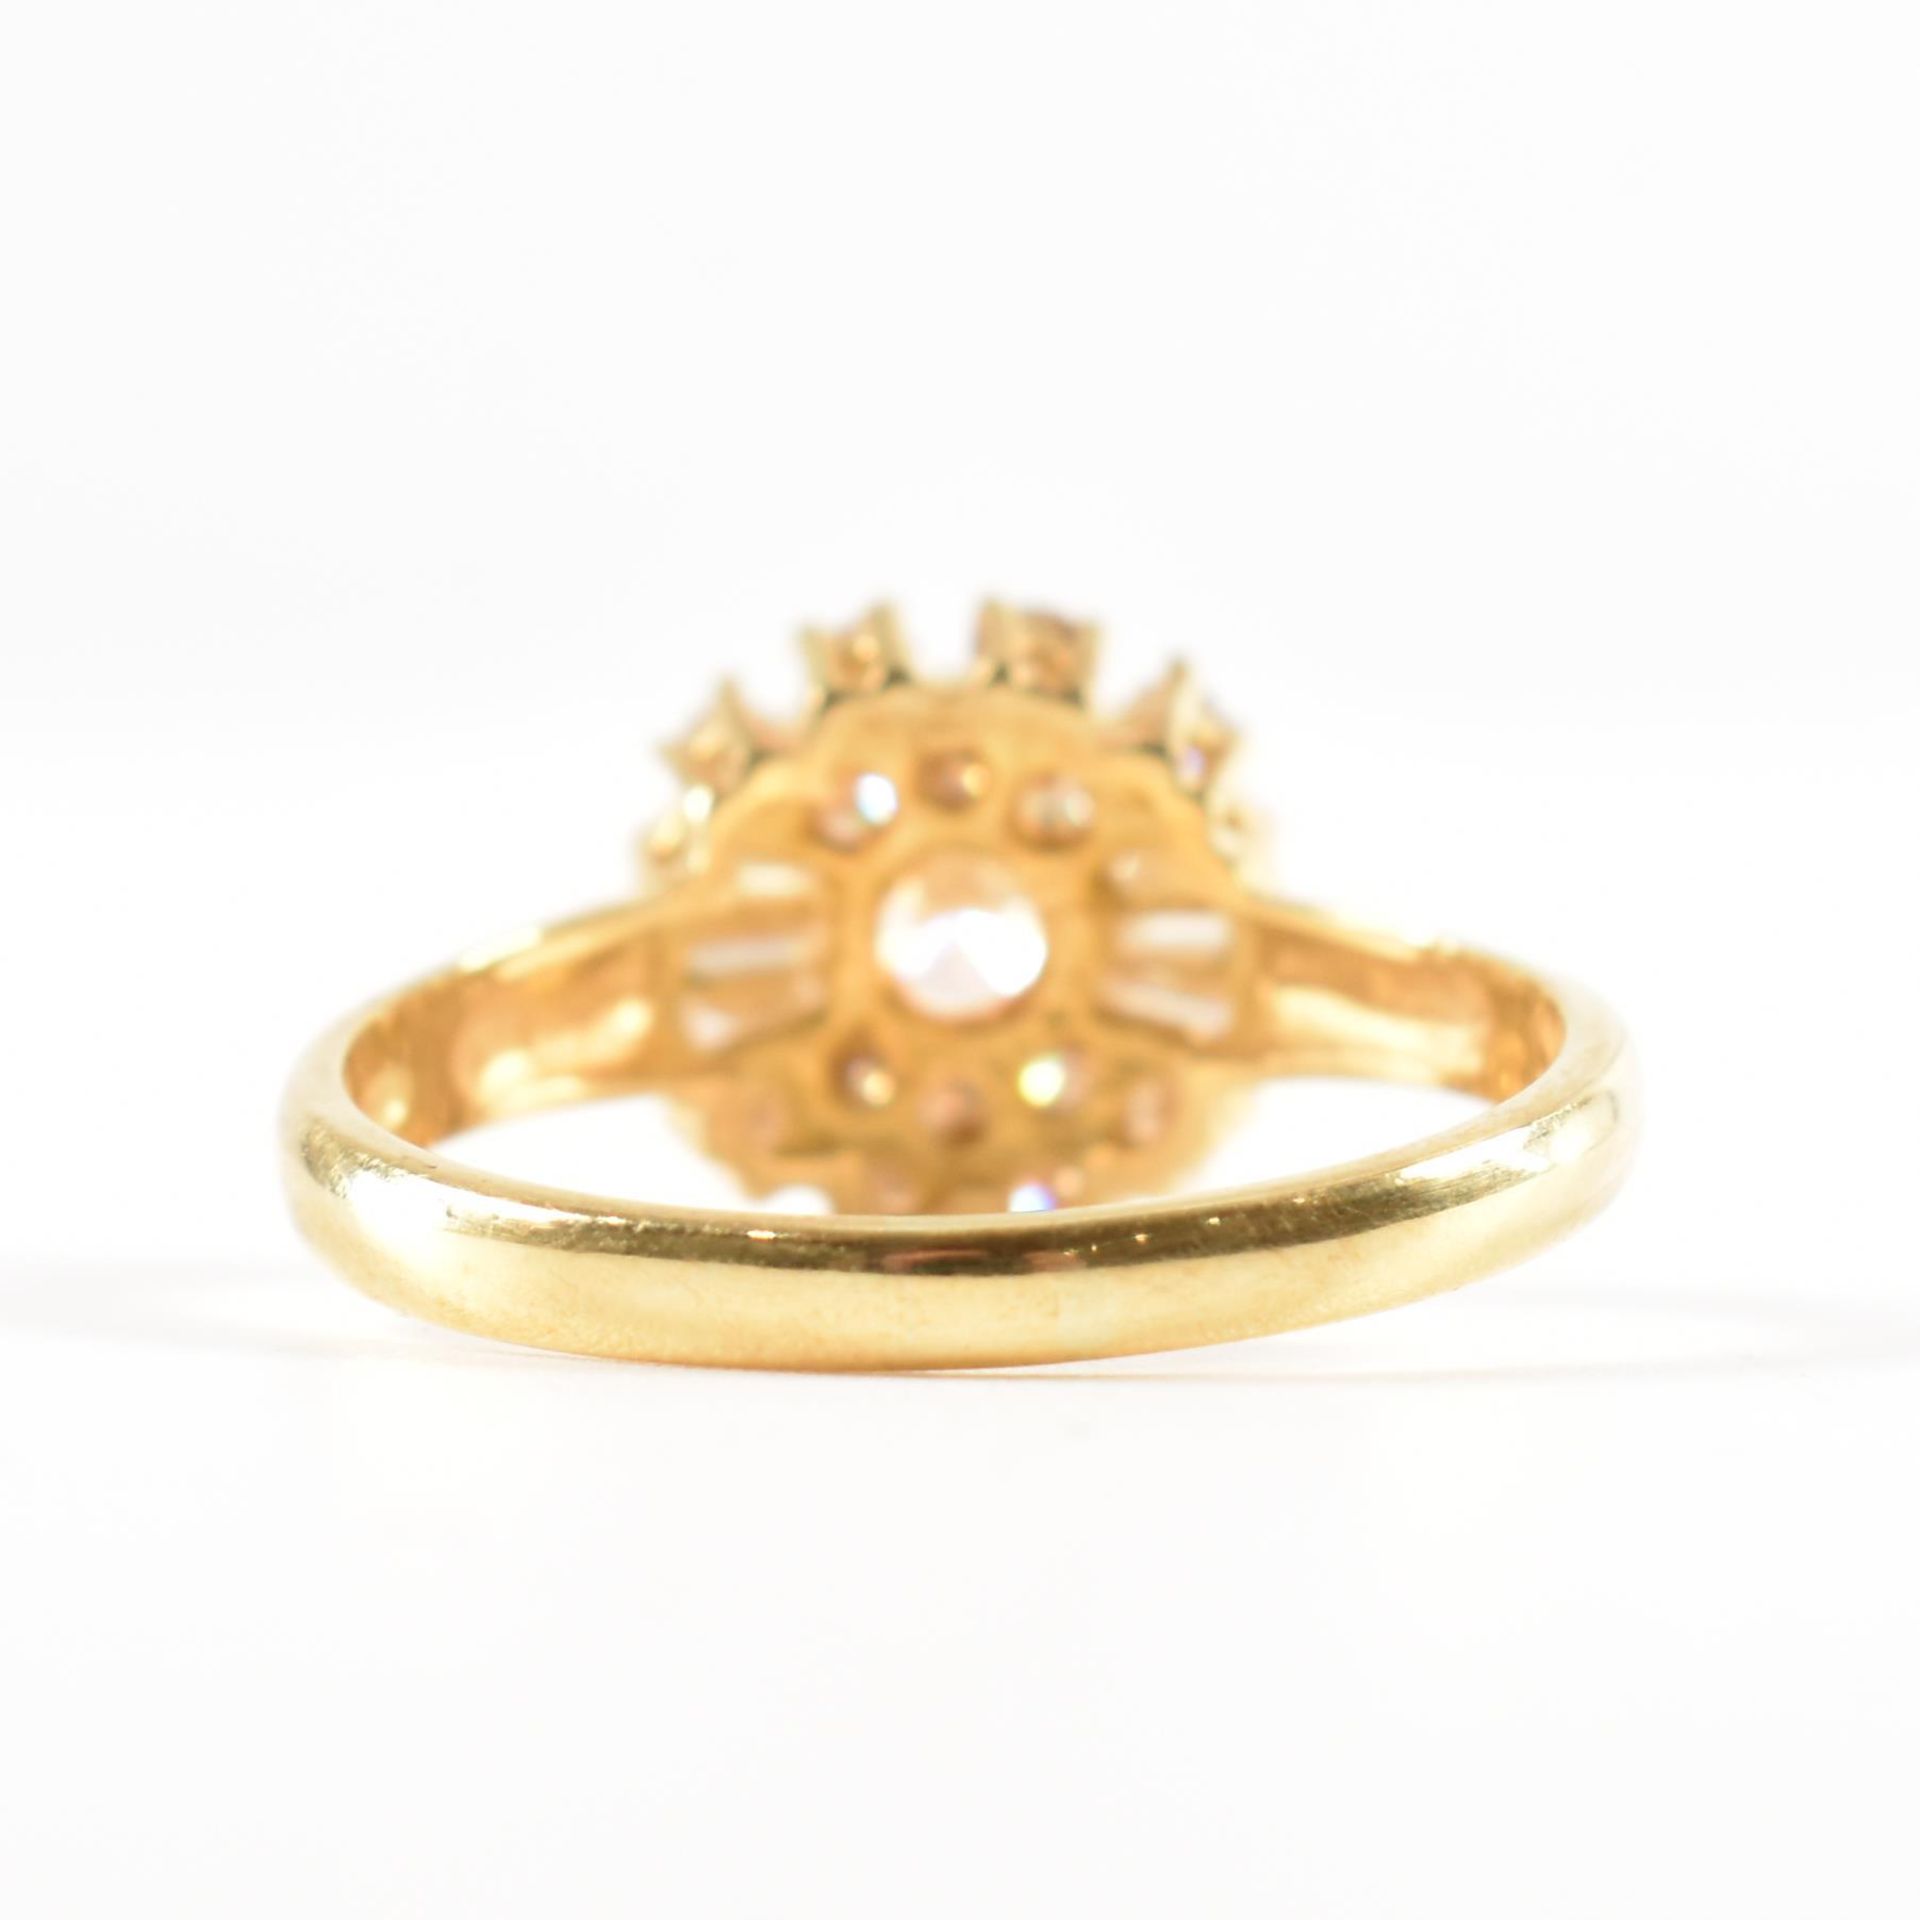 HALLMARKED 18CT GOLD & DIAMOND CLUSTER RING - Image 3 of 8